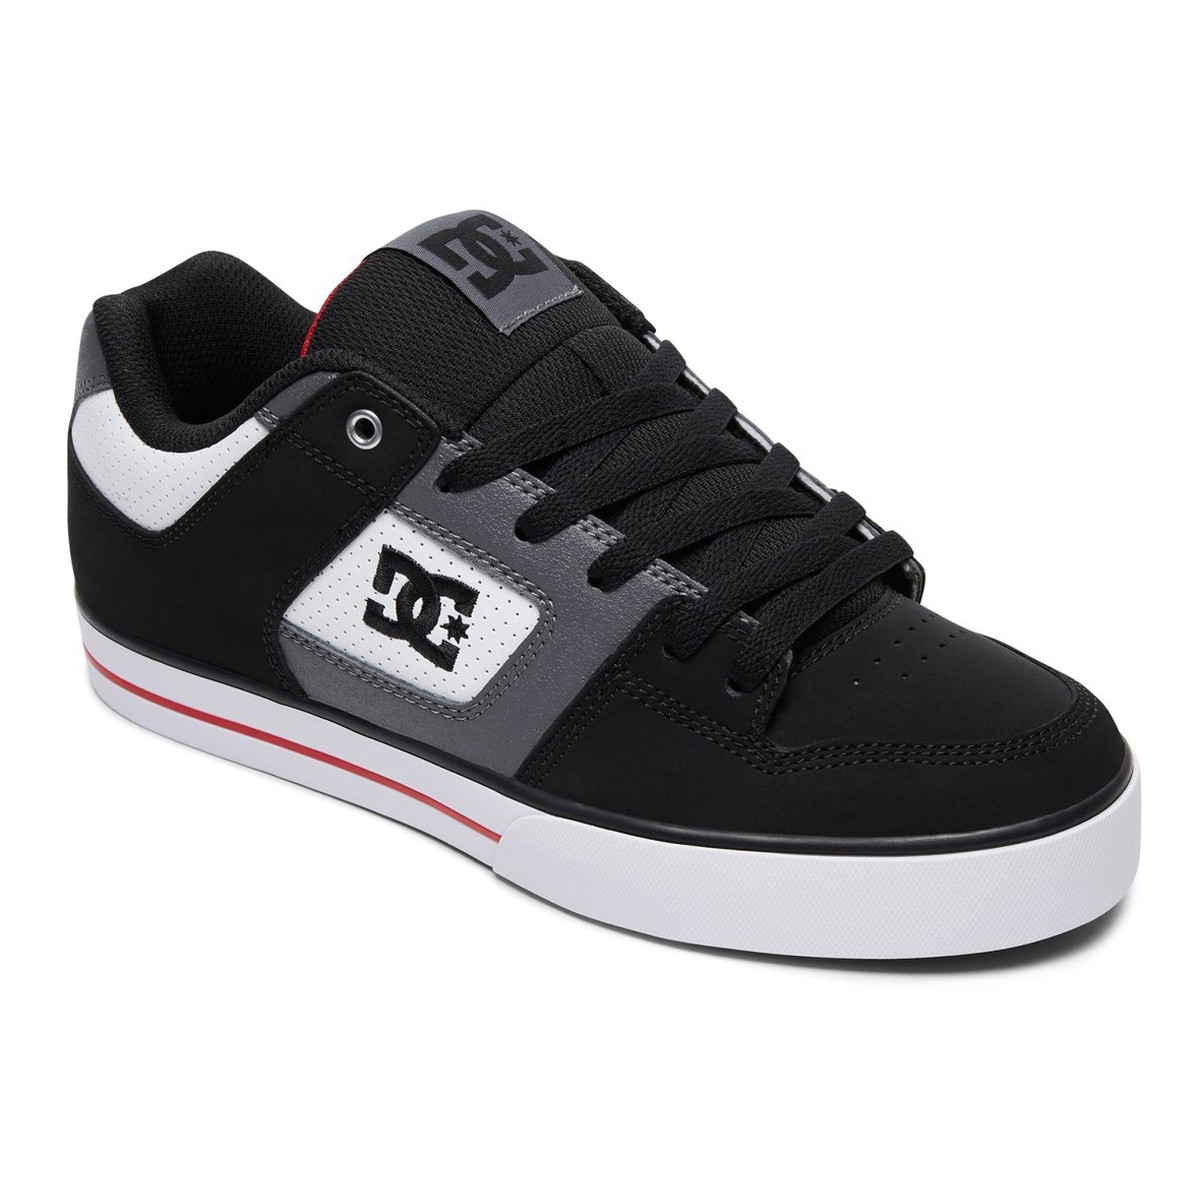 DC Shoes Pure White/Black/Red